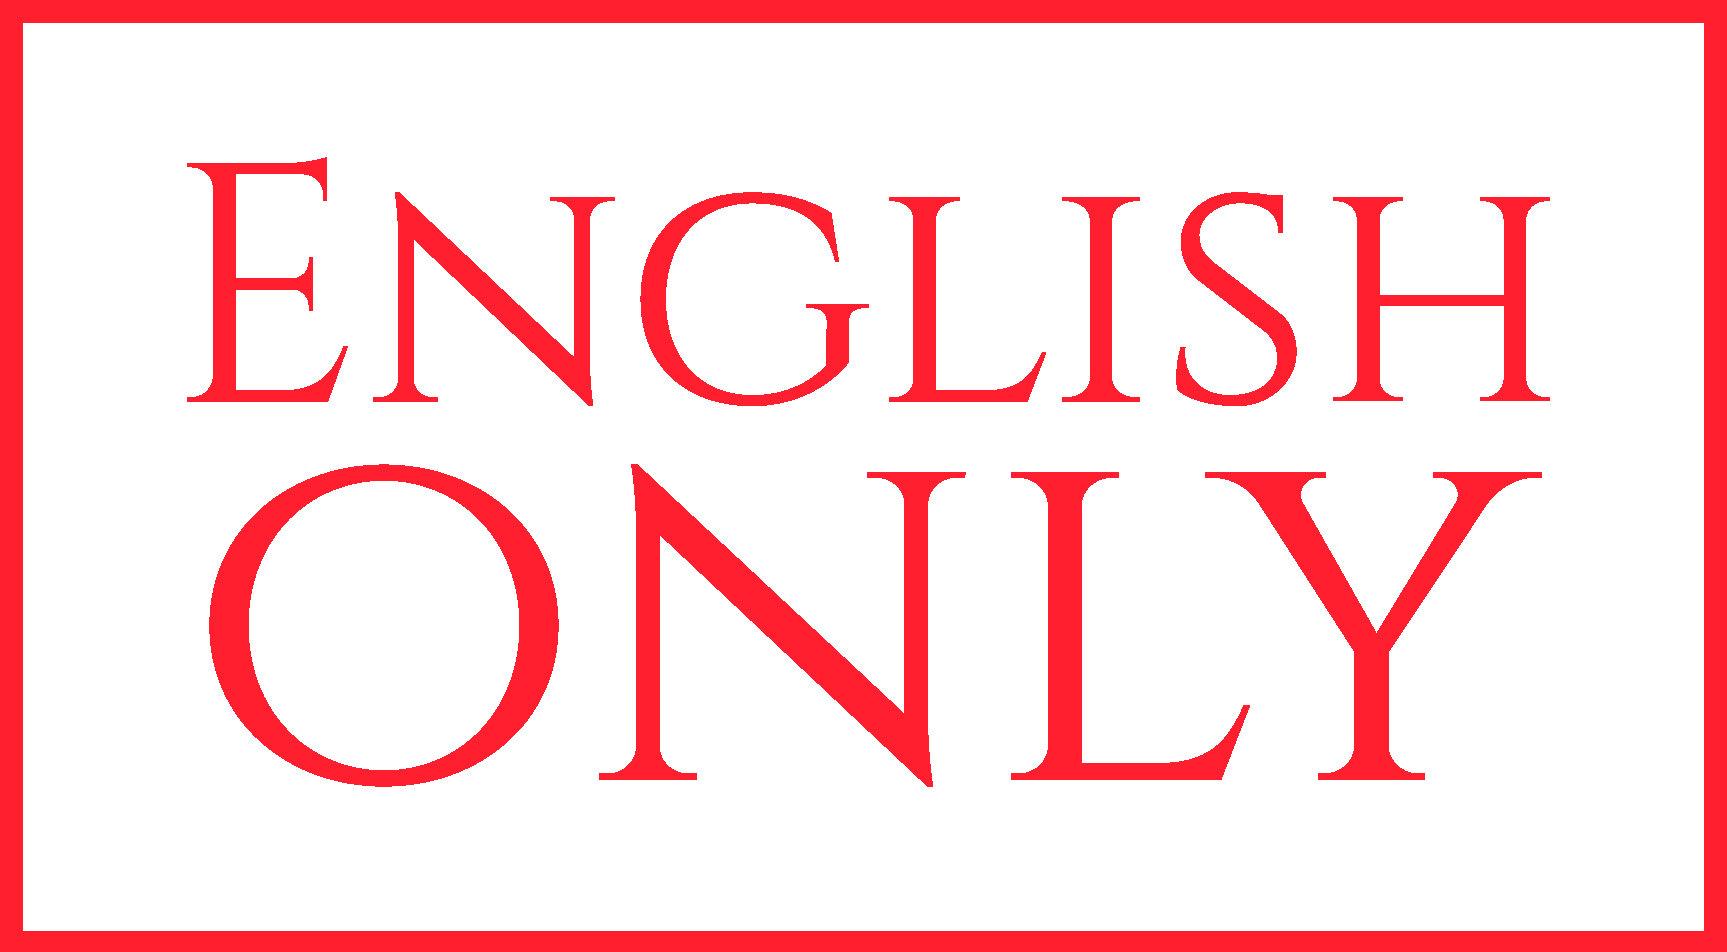 English spoken here. English only. Speak only English. English Zone. English Zone лого.